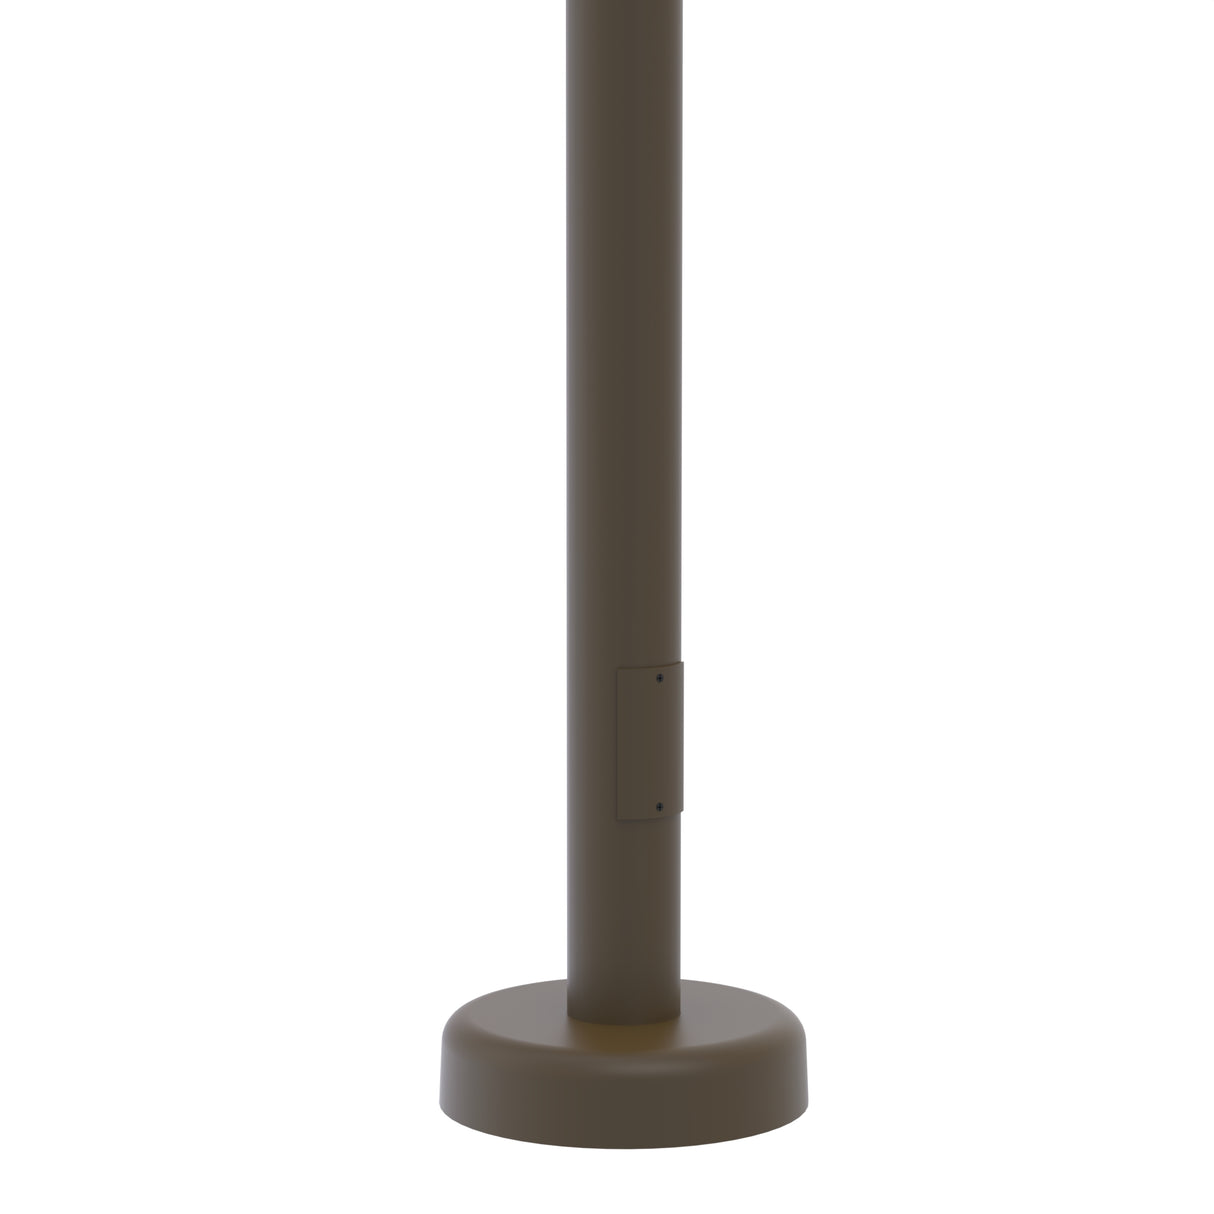 14' Tall x 4.0" Base OD x 3.0" Top OD x 0.125" Thick, Round Tapered Aluminum, Hinged Anchor Base Light Pole